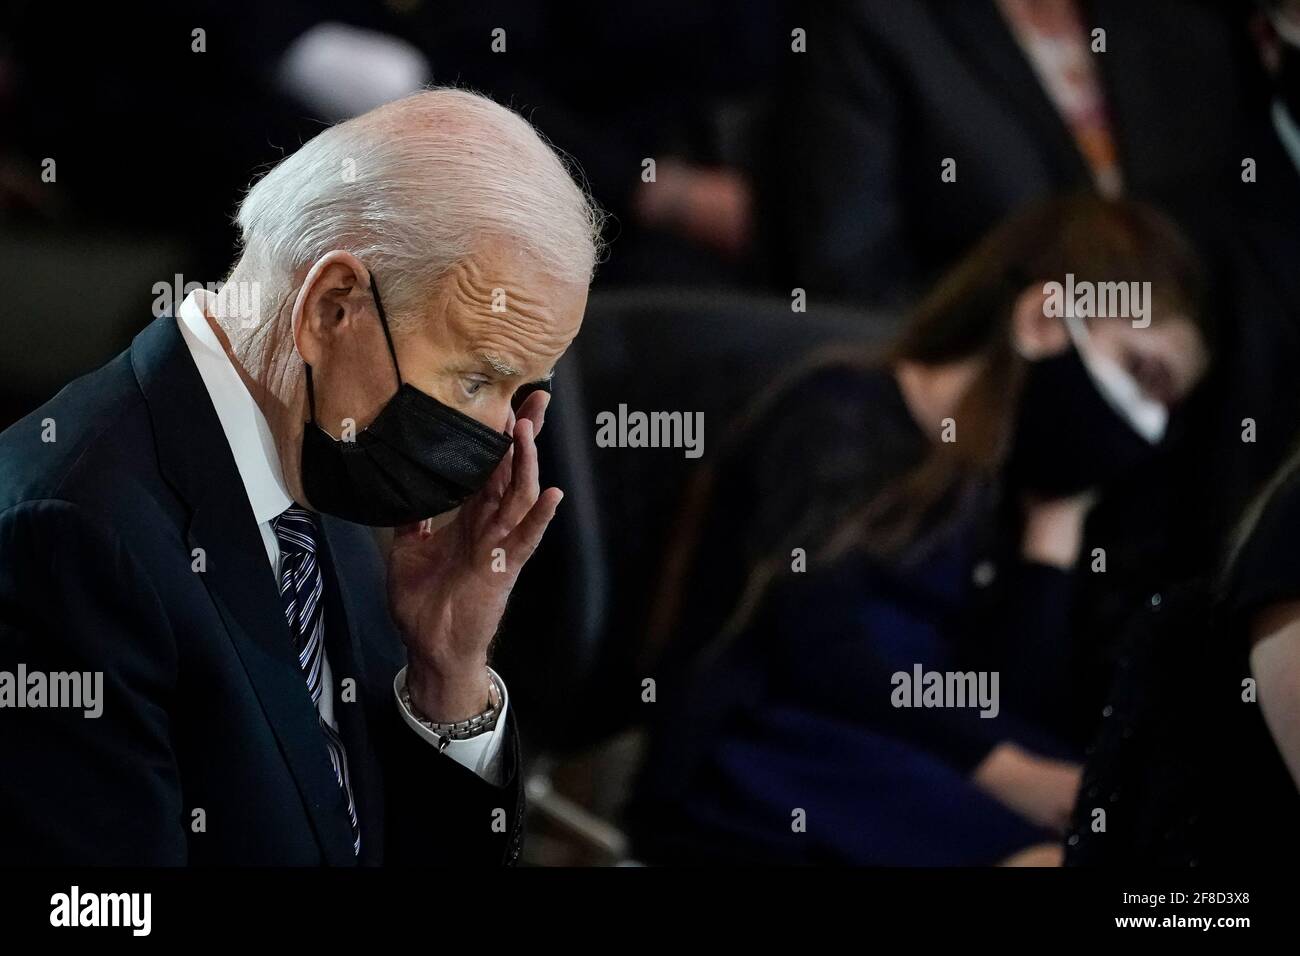 Washington, DC, USA. 13th Apr, 2021. President Joe Biden rubs his eye during a memorial for the late U.S. Capitol Police officer William 'Billy' Evans as he lies in honor in the Rotunda at the U.S. Capitol on April 13, 2021 in Washington, DC. Officer Evans was killed in the line of duty during the attack outside the U.S. Capitol on April 2. He is the sixth Capitol Police officer to die in the line of duty in the nearly 200 years since the force was created. Credit: Drew Angerer/Pool Via Cnp/Media Punch/Alamy Live News Stock Photo